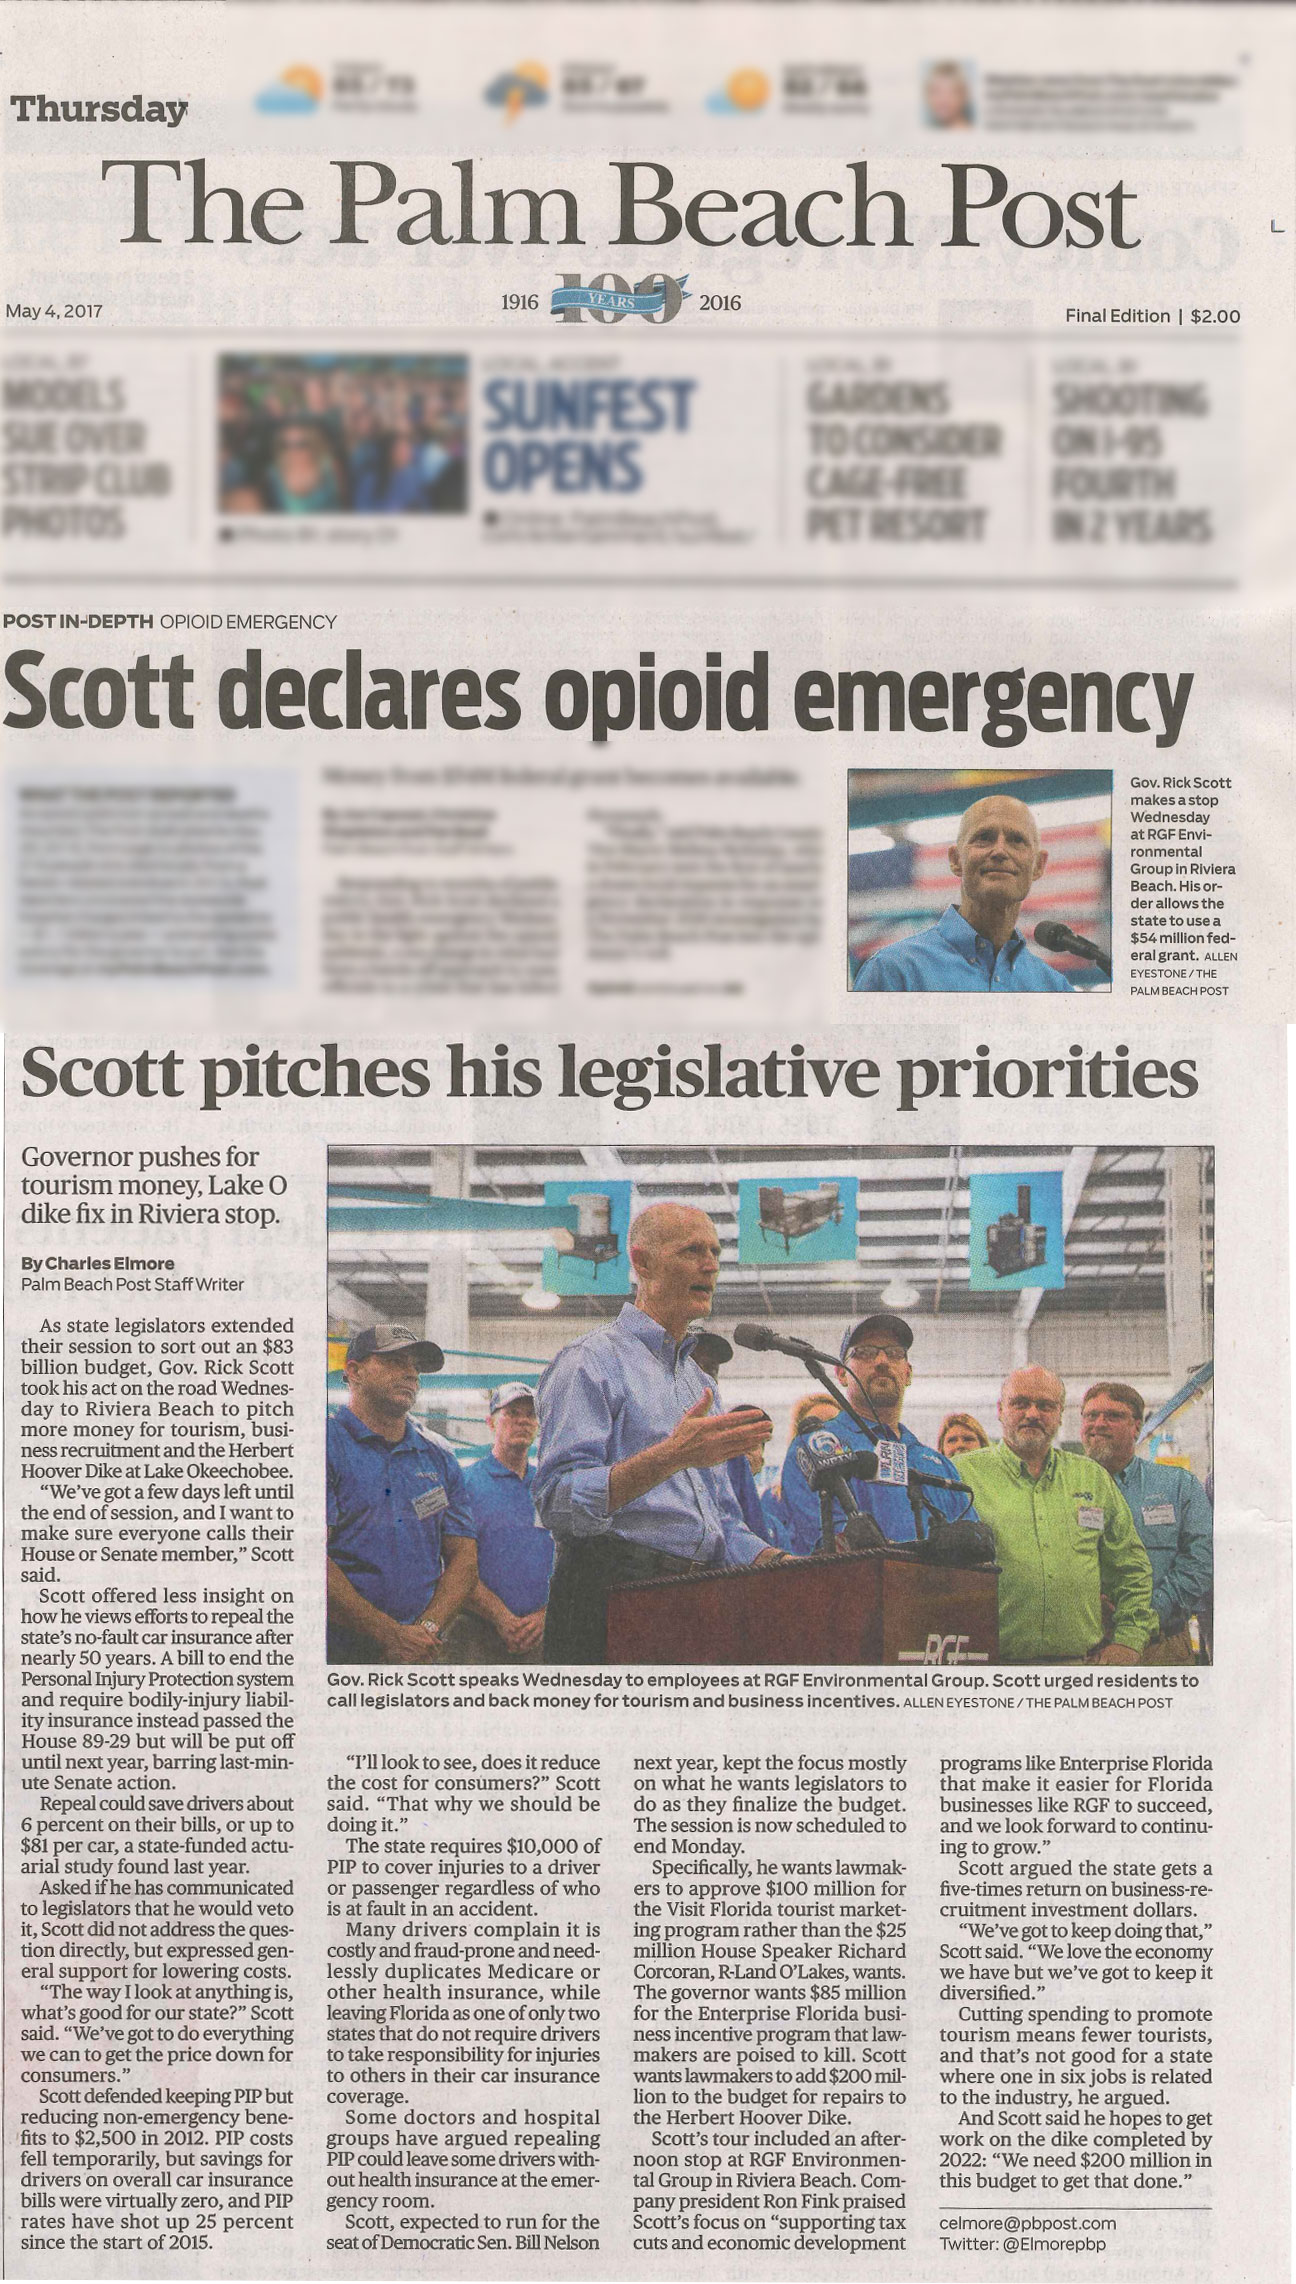 The Palm Beach Post, May 2017 – Governor Rick Scott